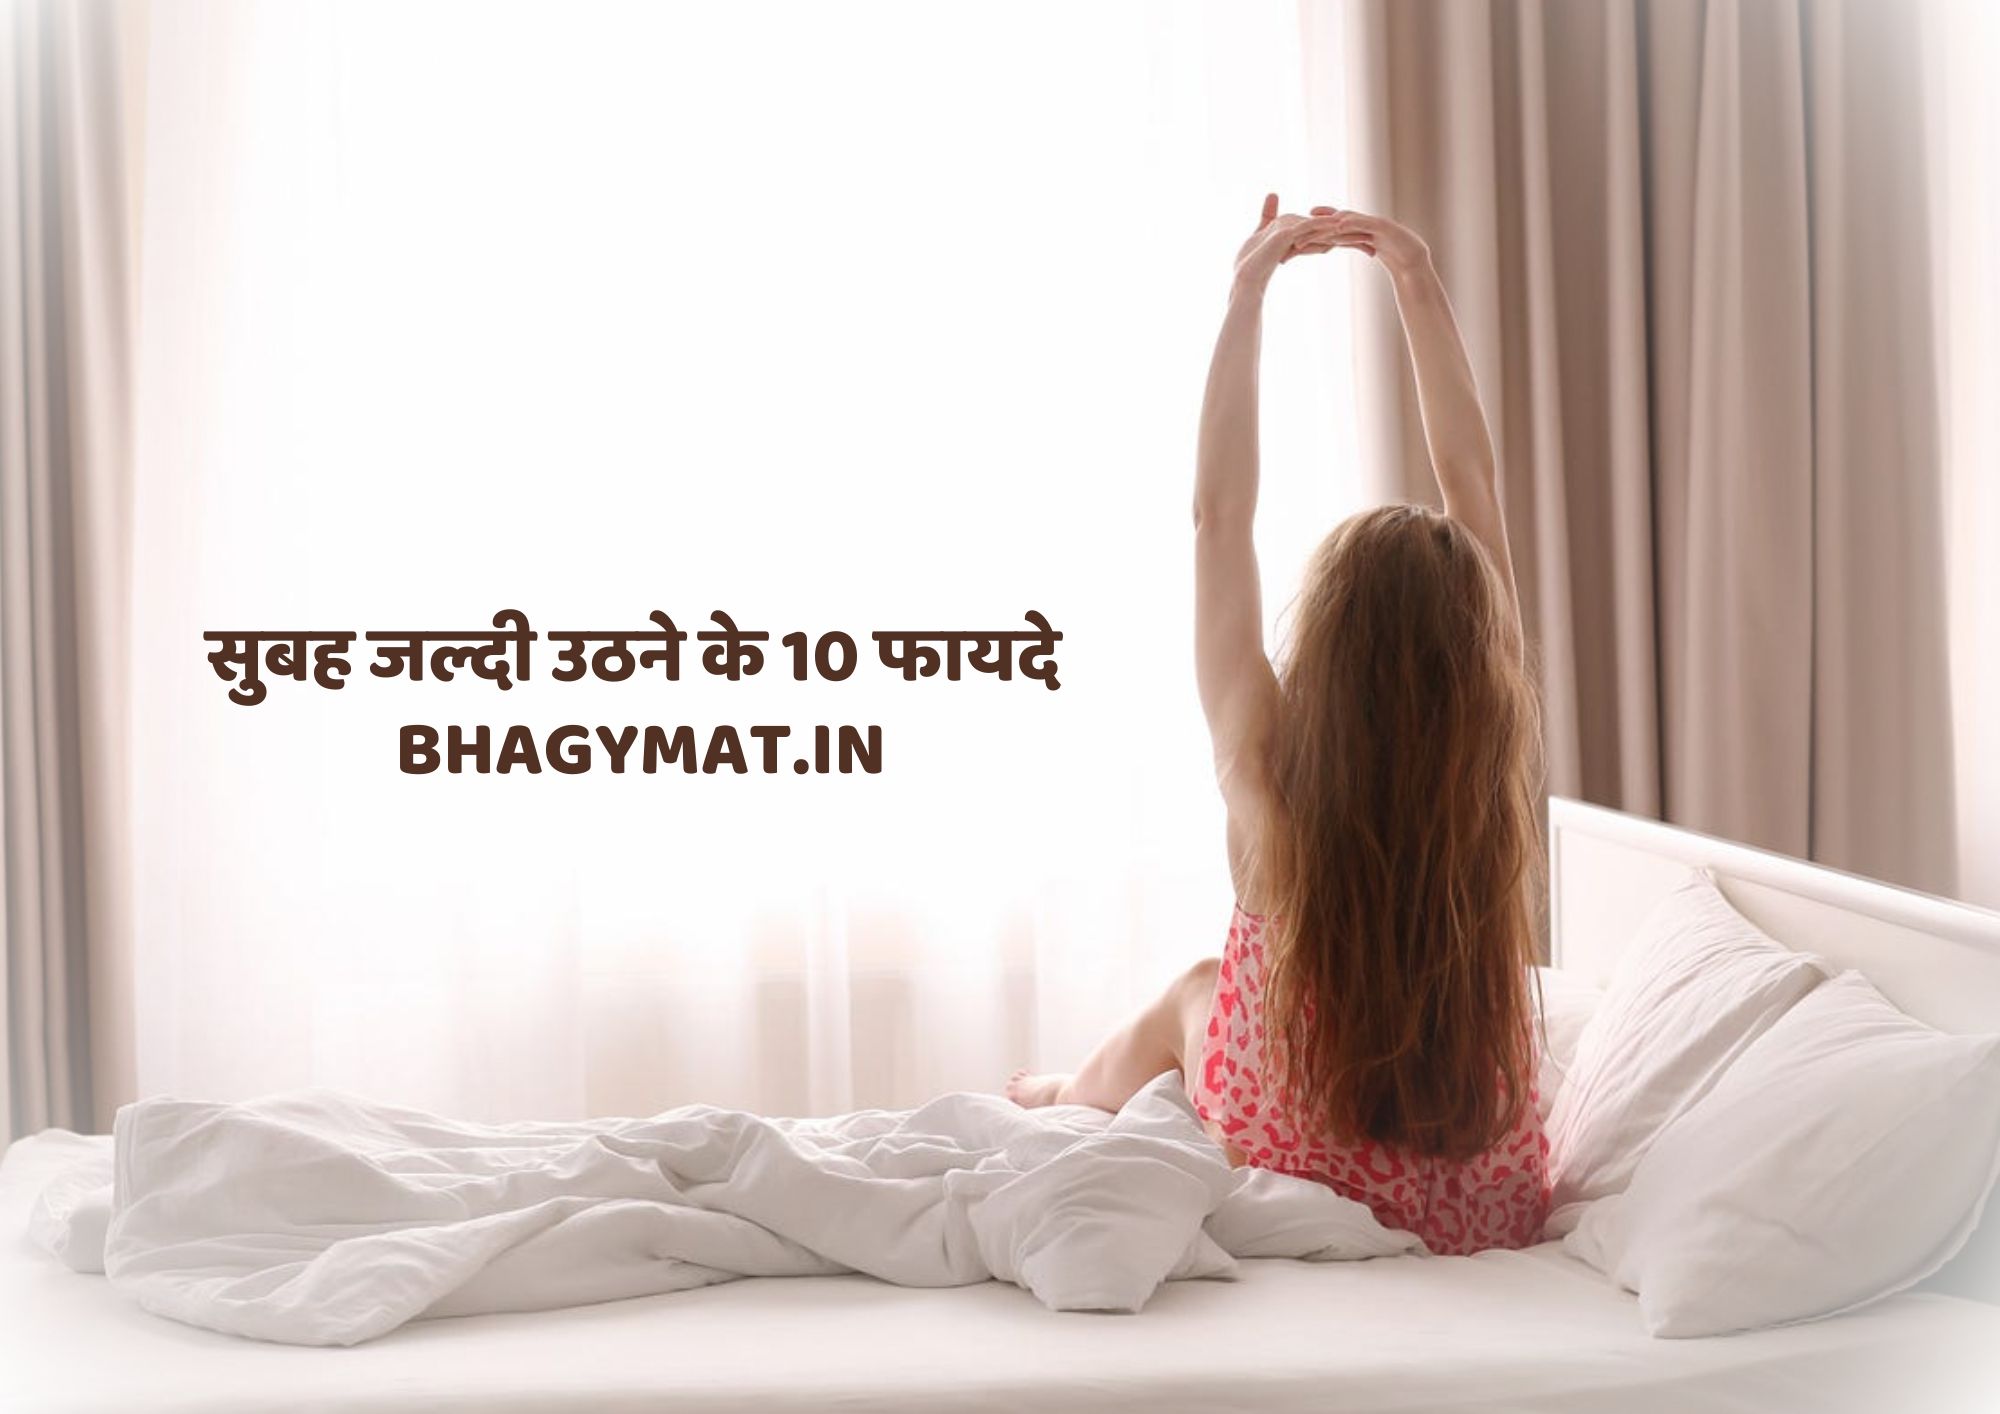 सुबह जल्दी उठने के 10 फायदे (10 Benefits Of Getting Up Early In The Morning)